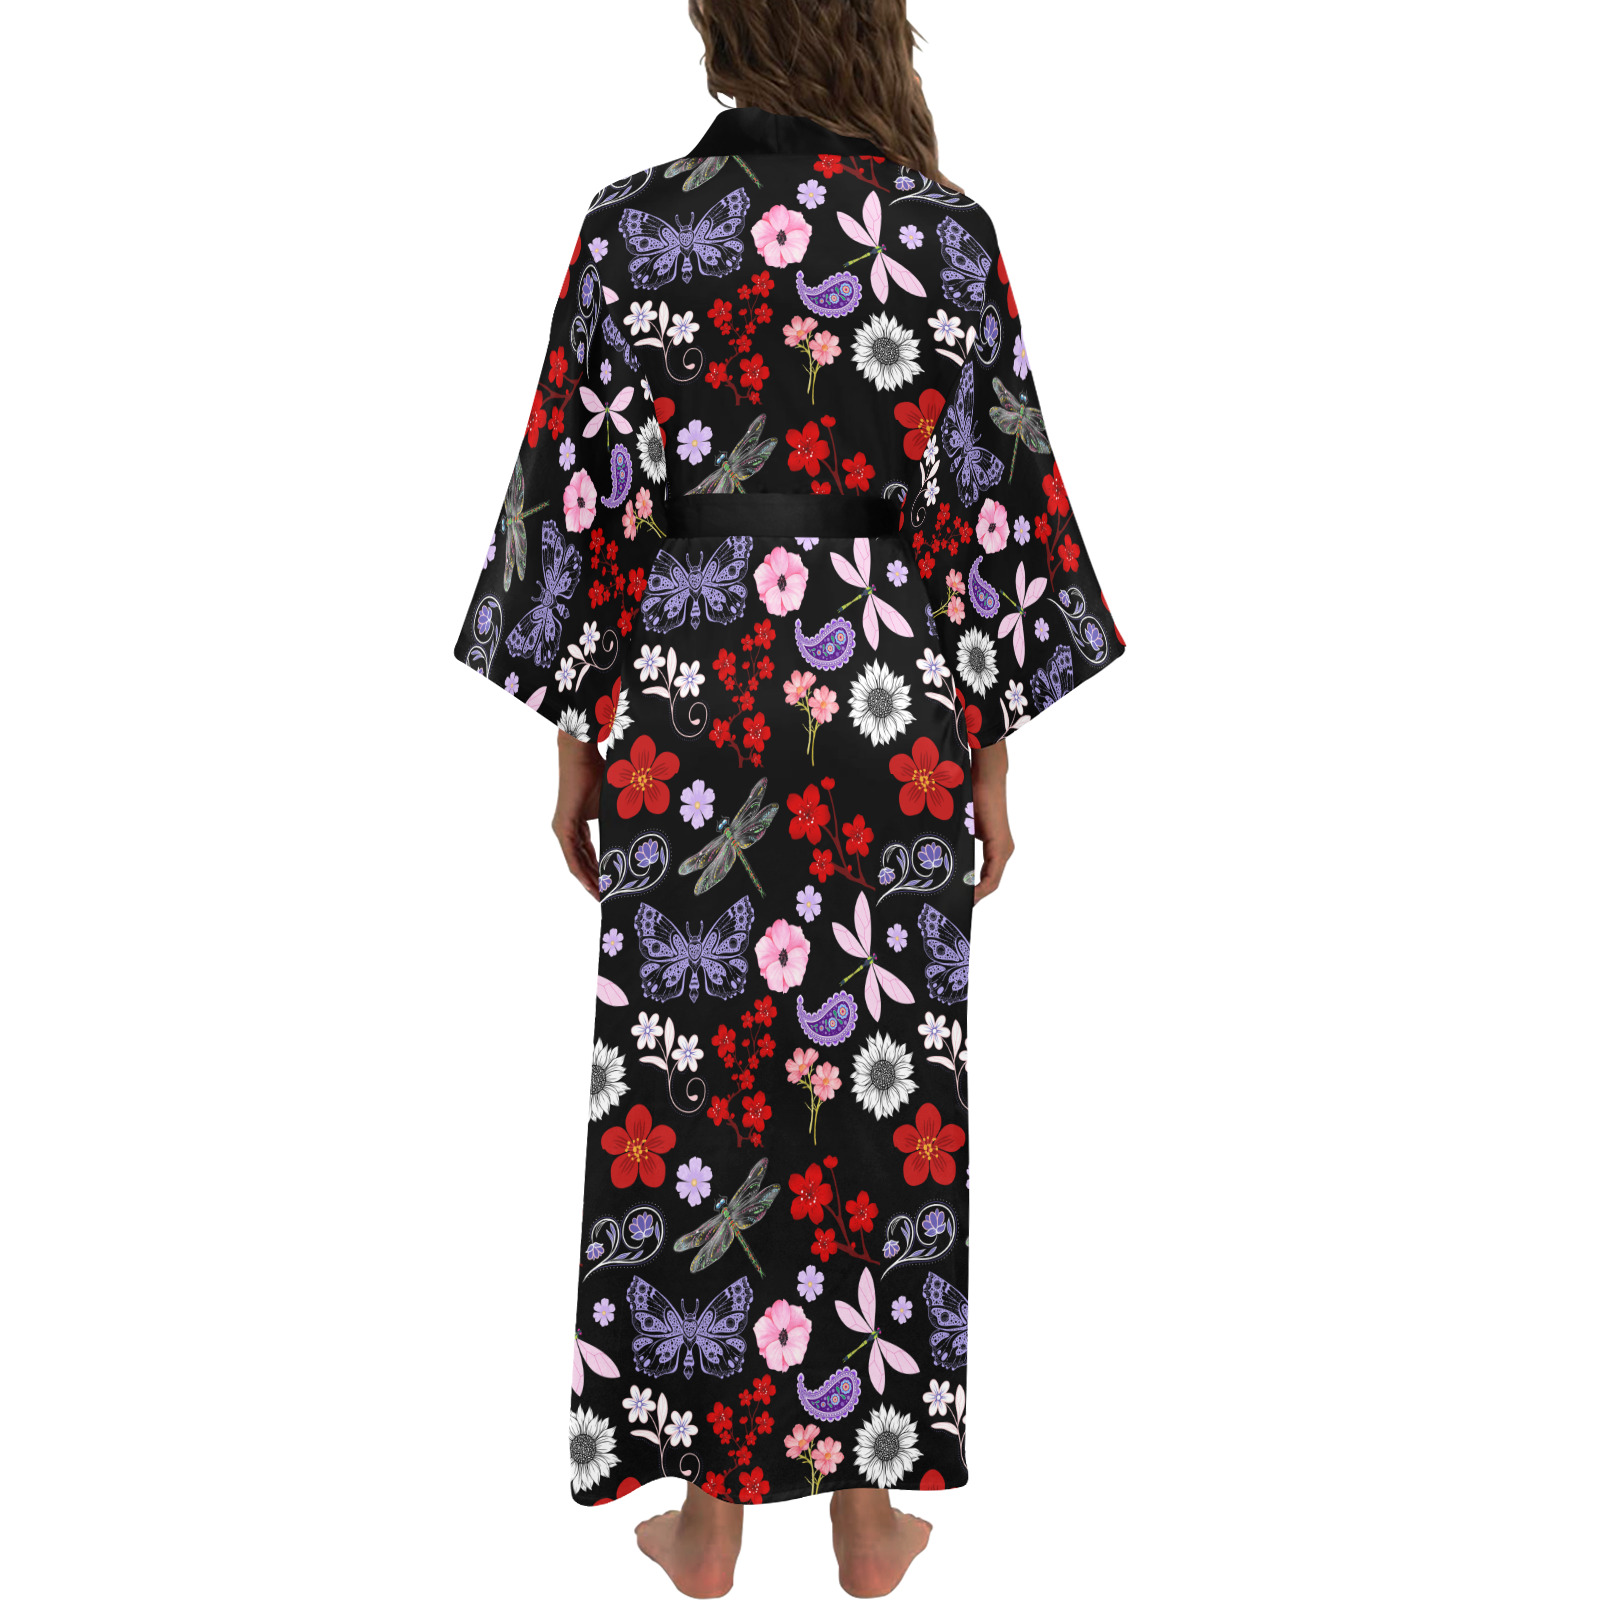 Black, Red, Pink, Purple, Dragonflies, Butterfly and Flowers Design Long Kimono Robe